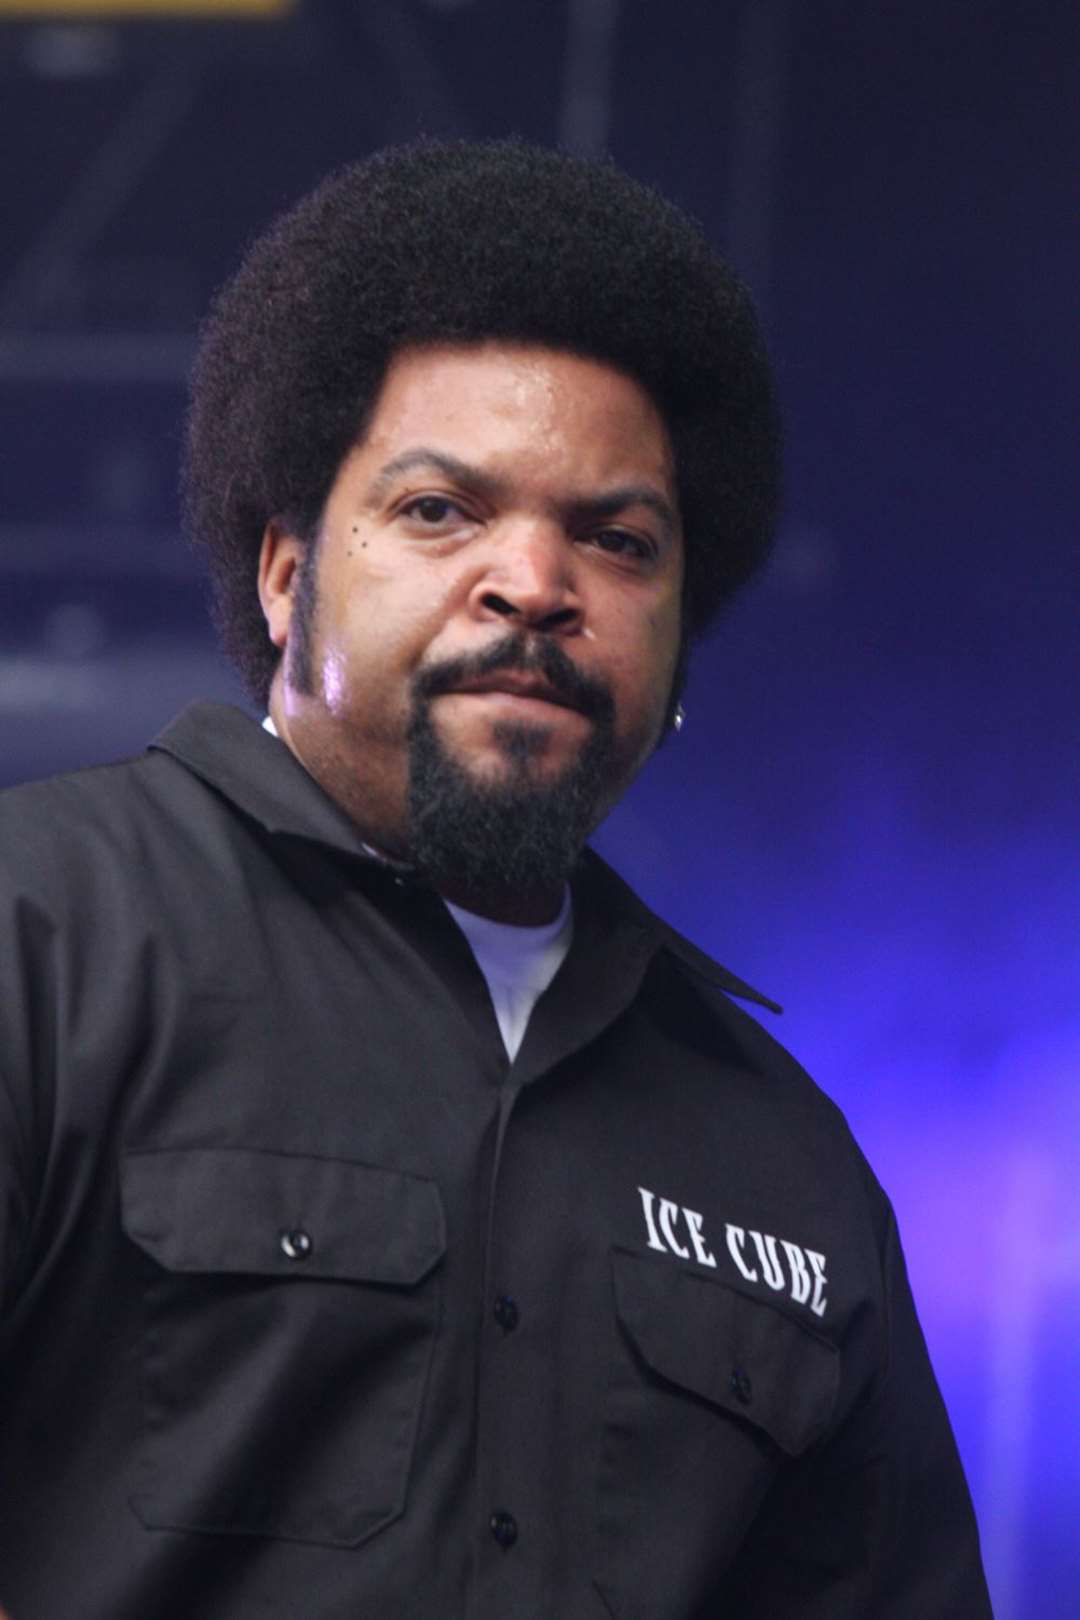 Lord Ice Cube.